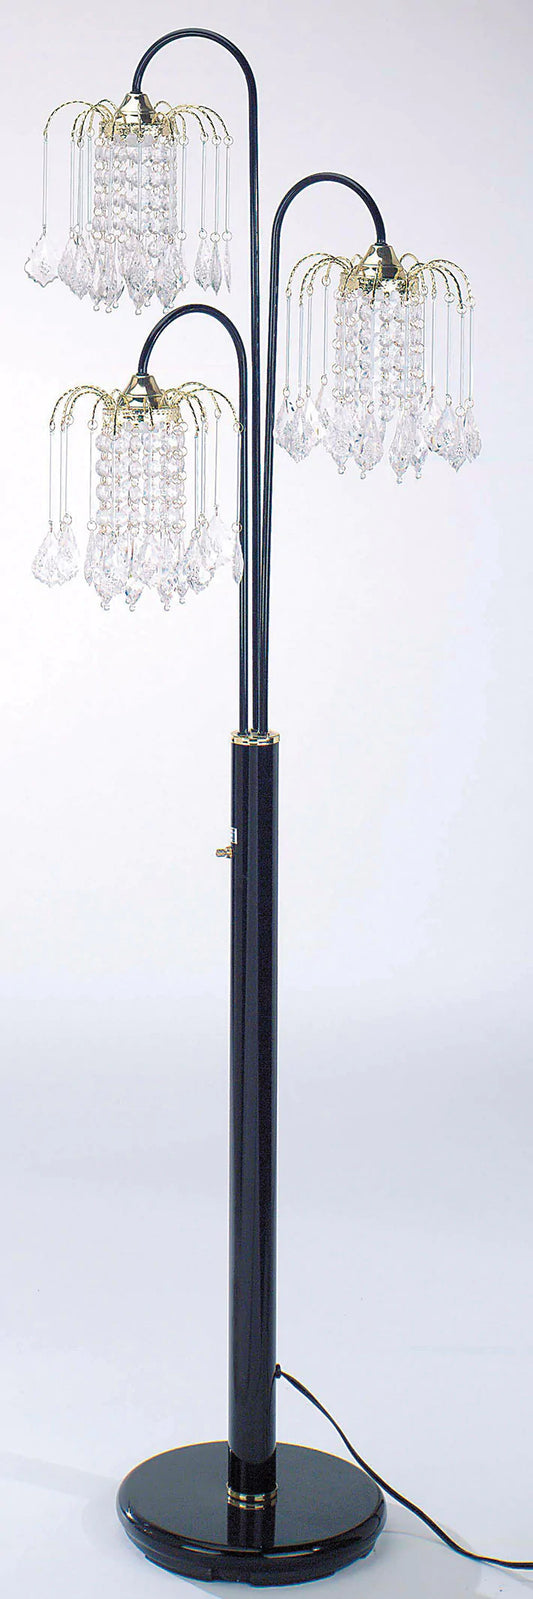 Elegant crystal tree floor lamp Measures 63" H Inch tall The body and base is made of metal Faux crystal ornaments